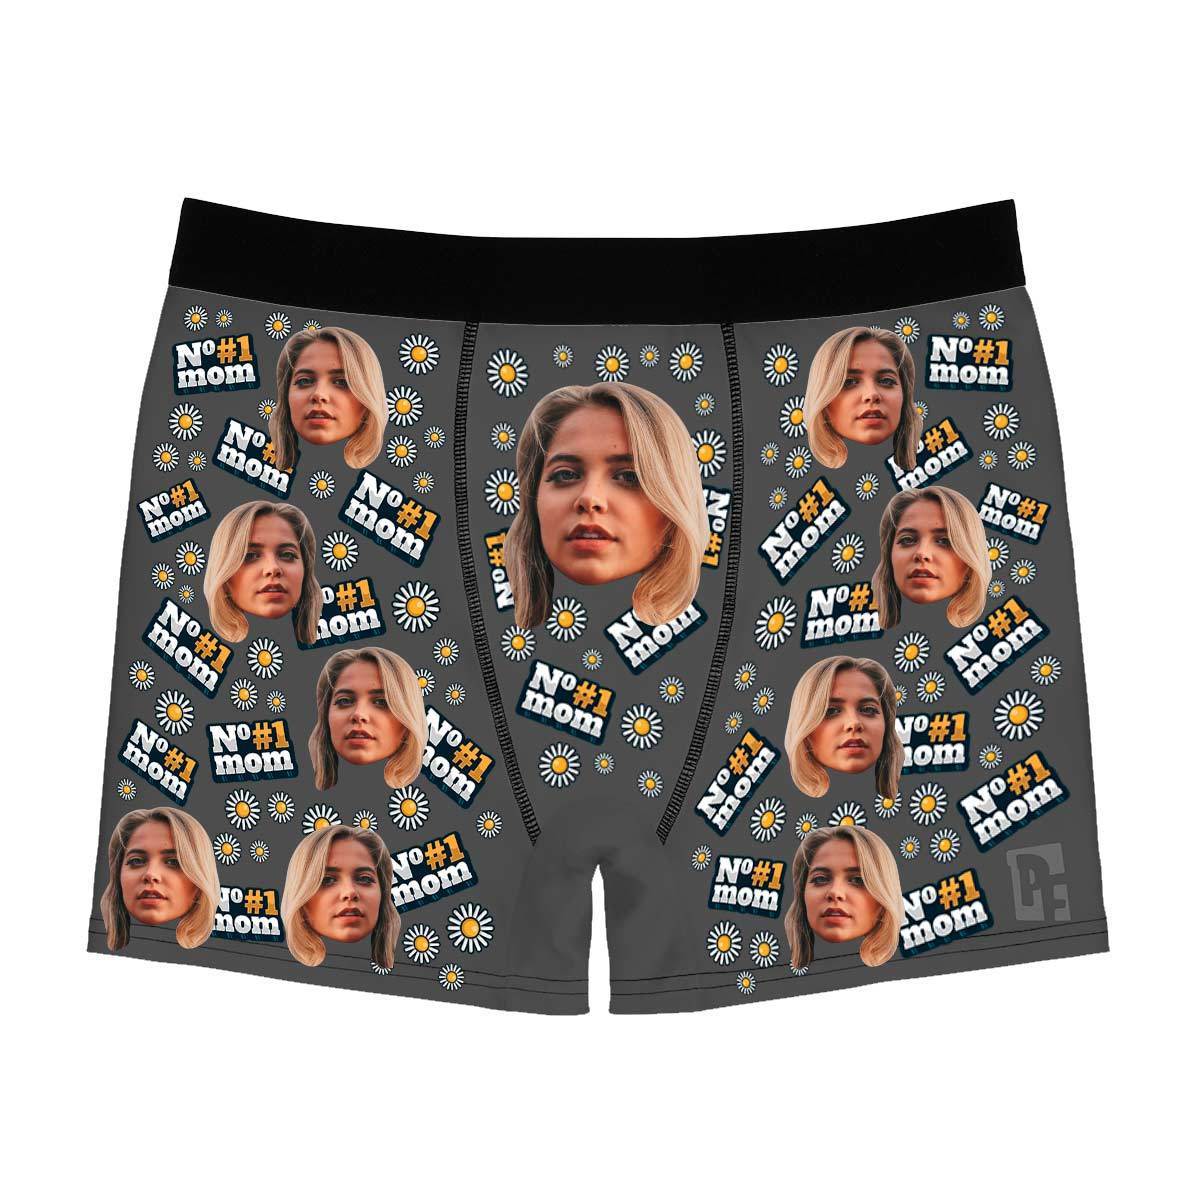 Dark #1 Mom men's boxer briefs personalized with photo printed on them